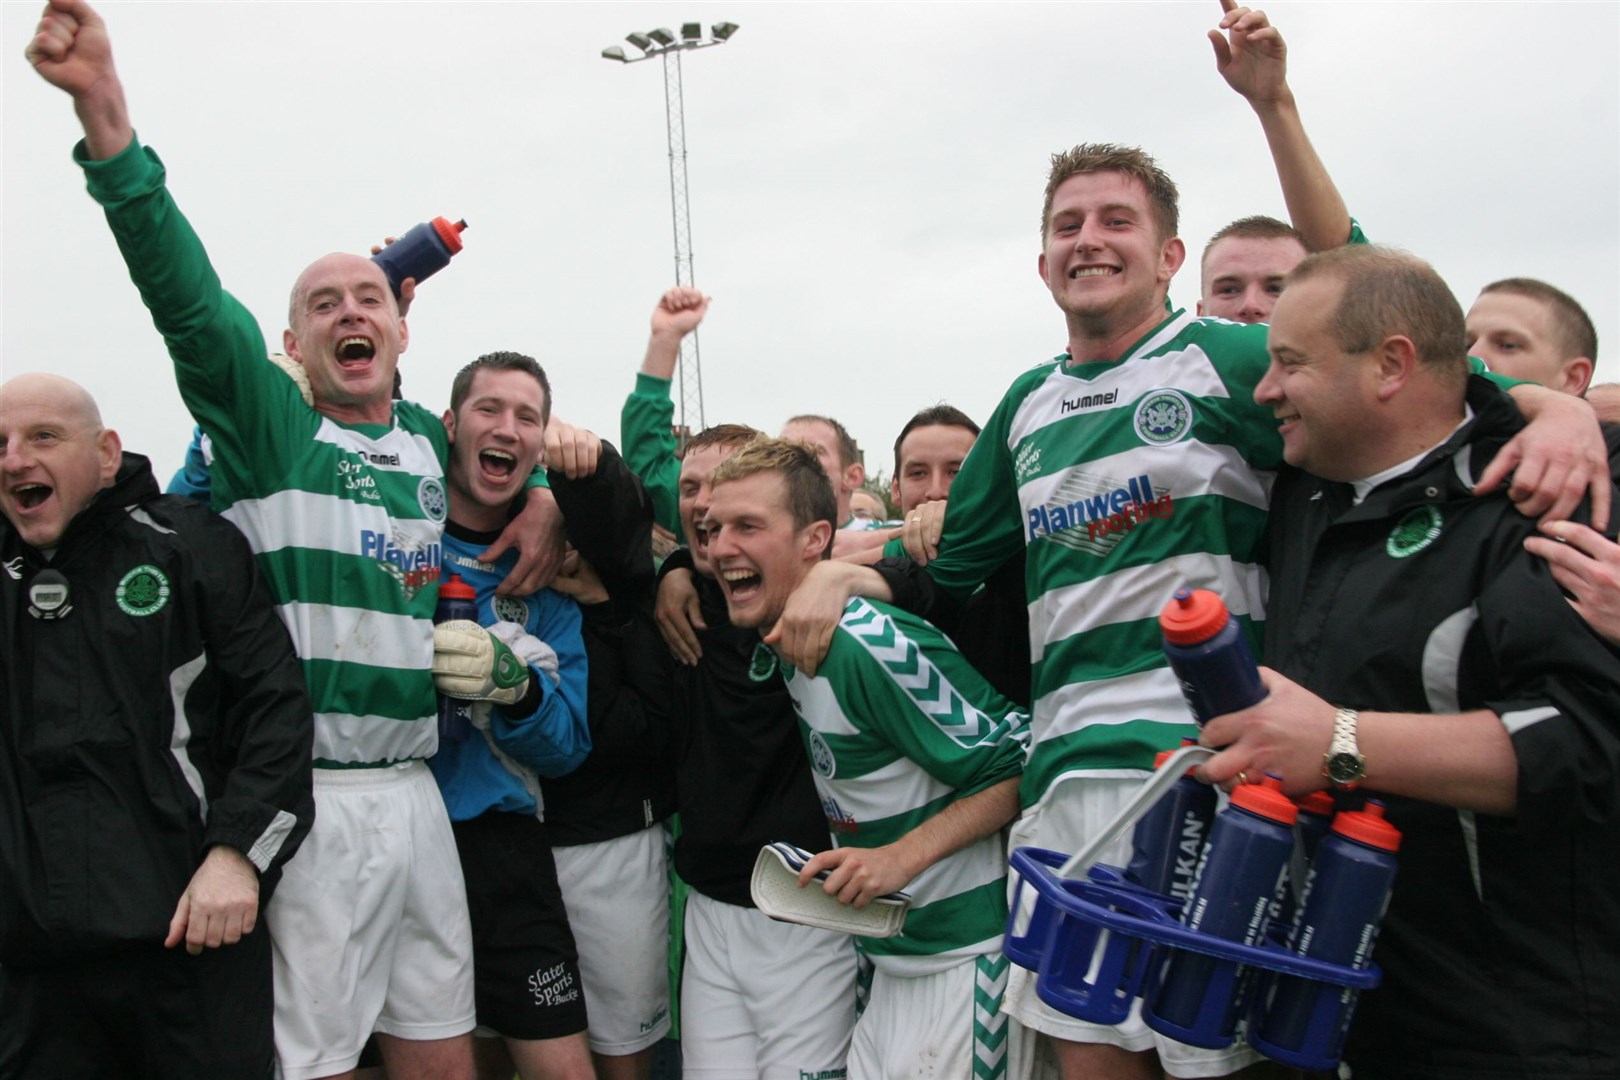 Kevin Main has enjoyed past trophy success at Buckie and wants to finish off with more silverware.